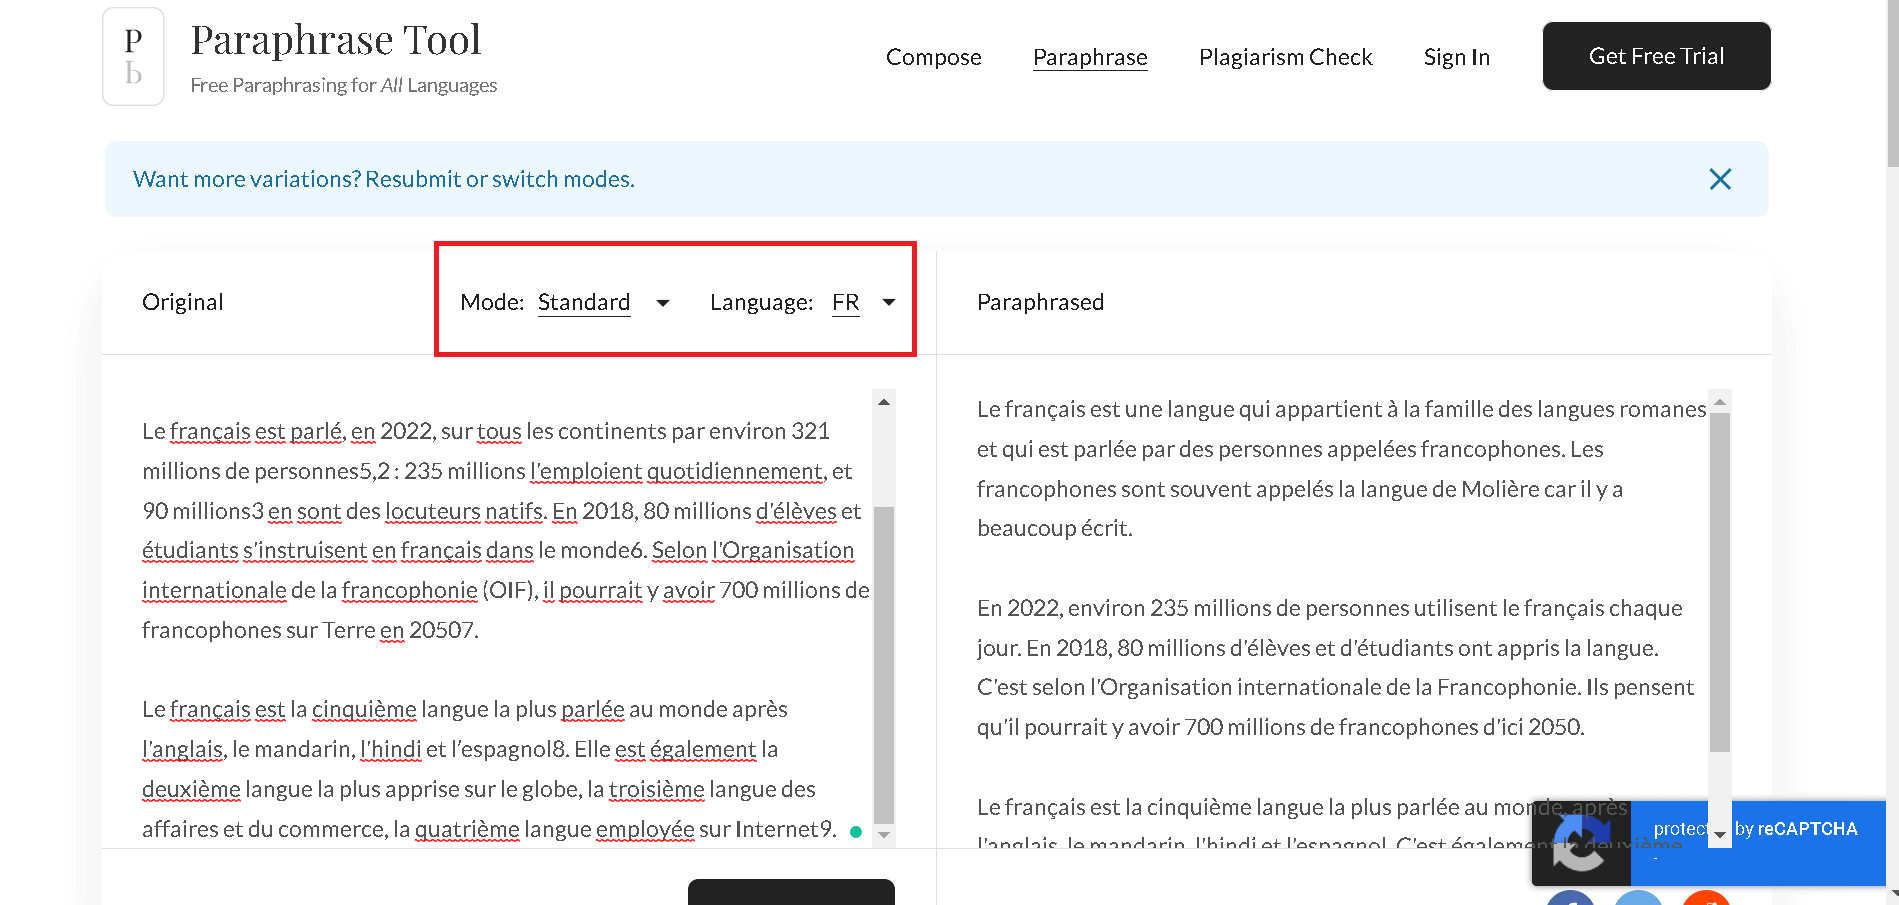 Paraphrase Tool can rephrase French content